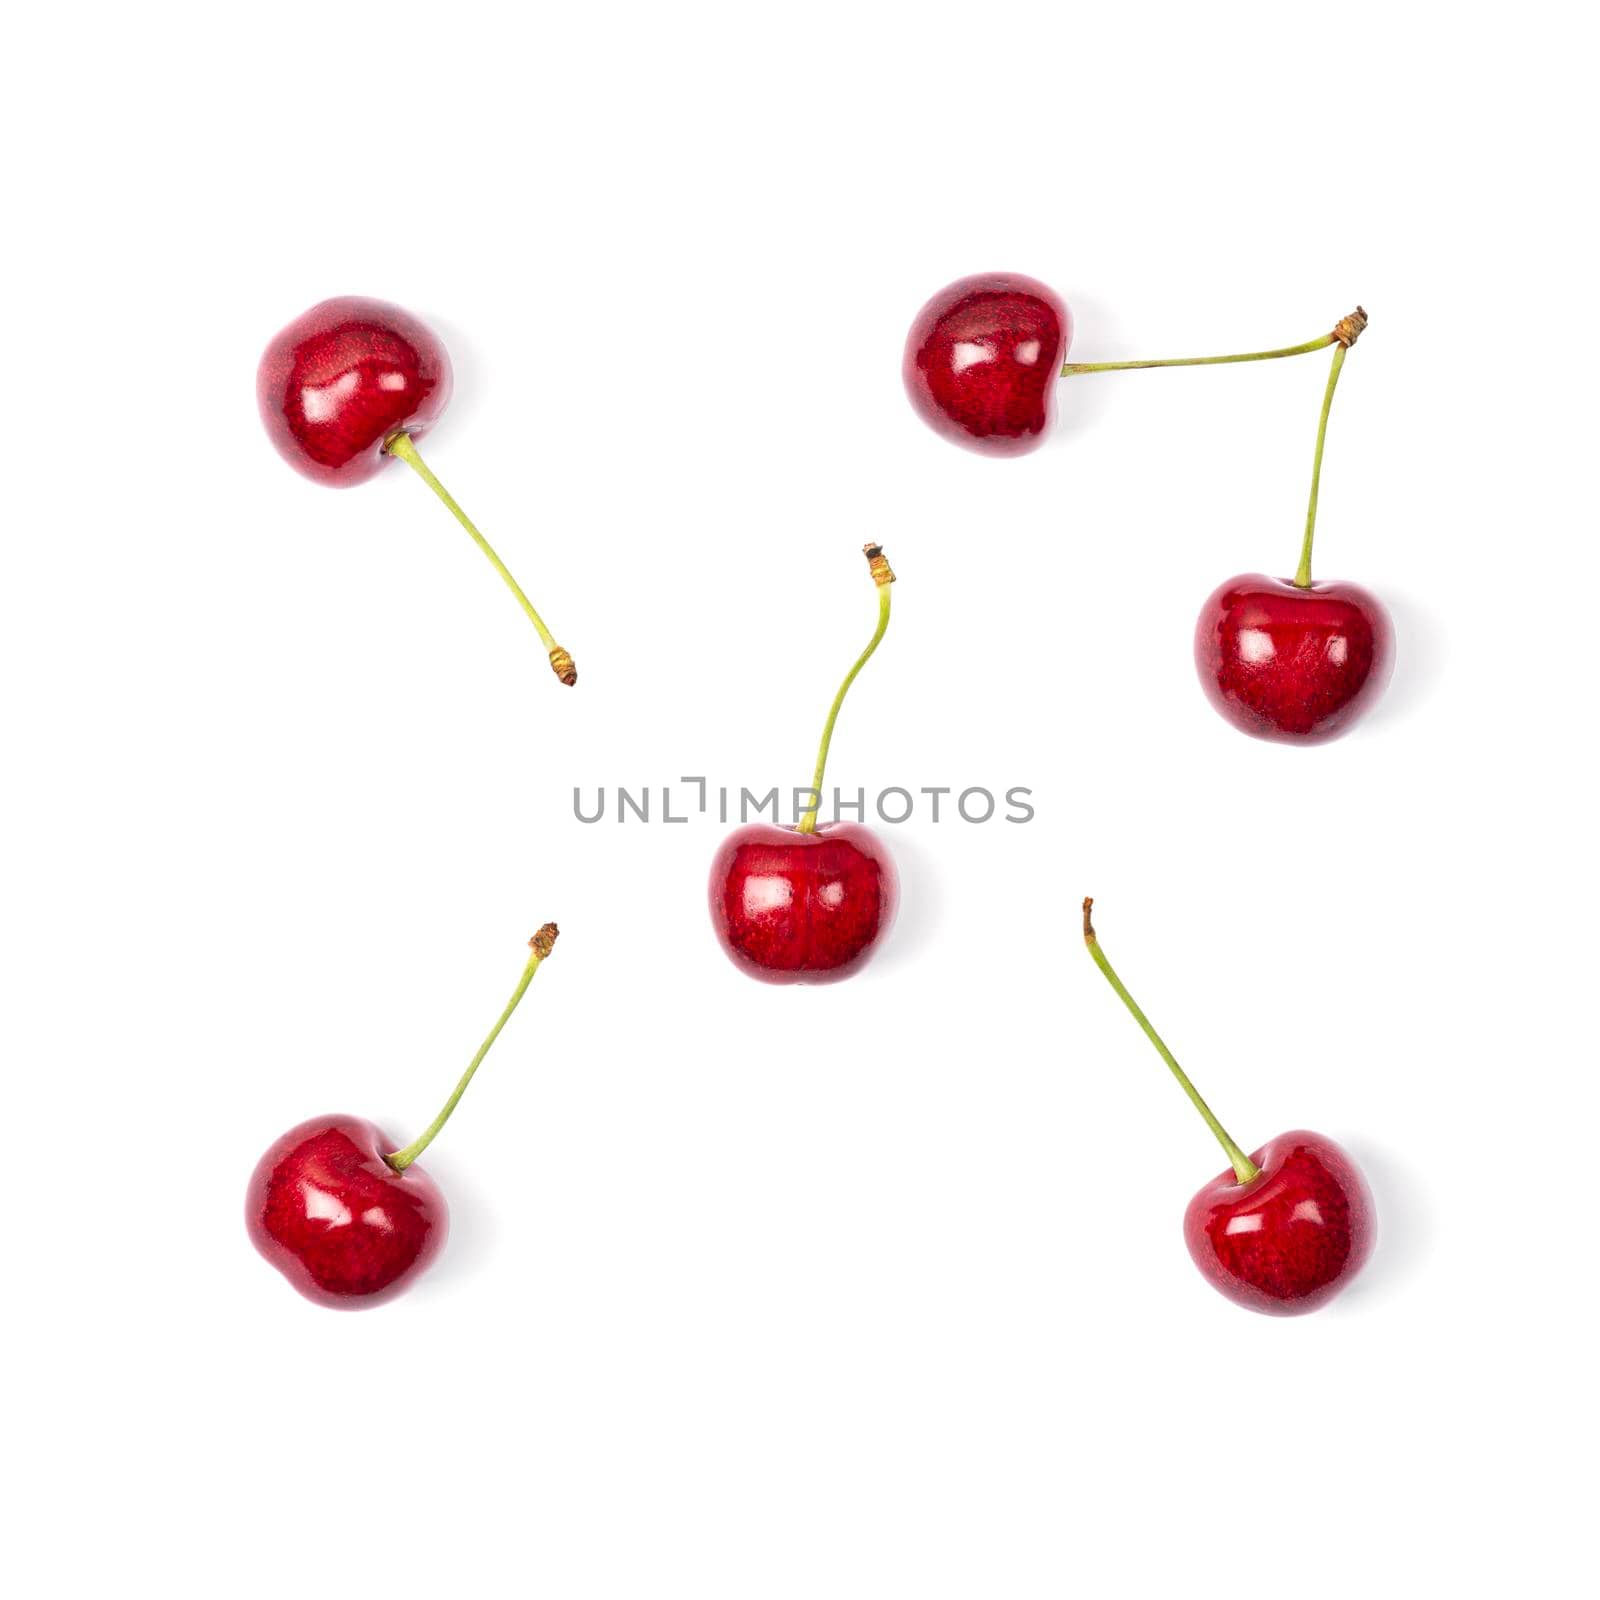 Ripe red sweet cherry isolated on white background. Macro photo close up. Six cherries on white background.